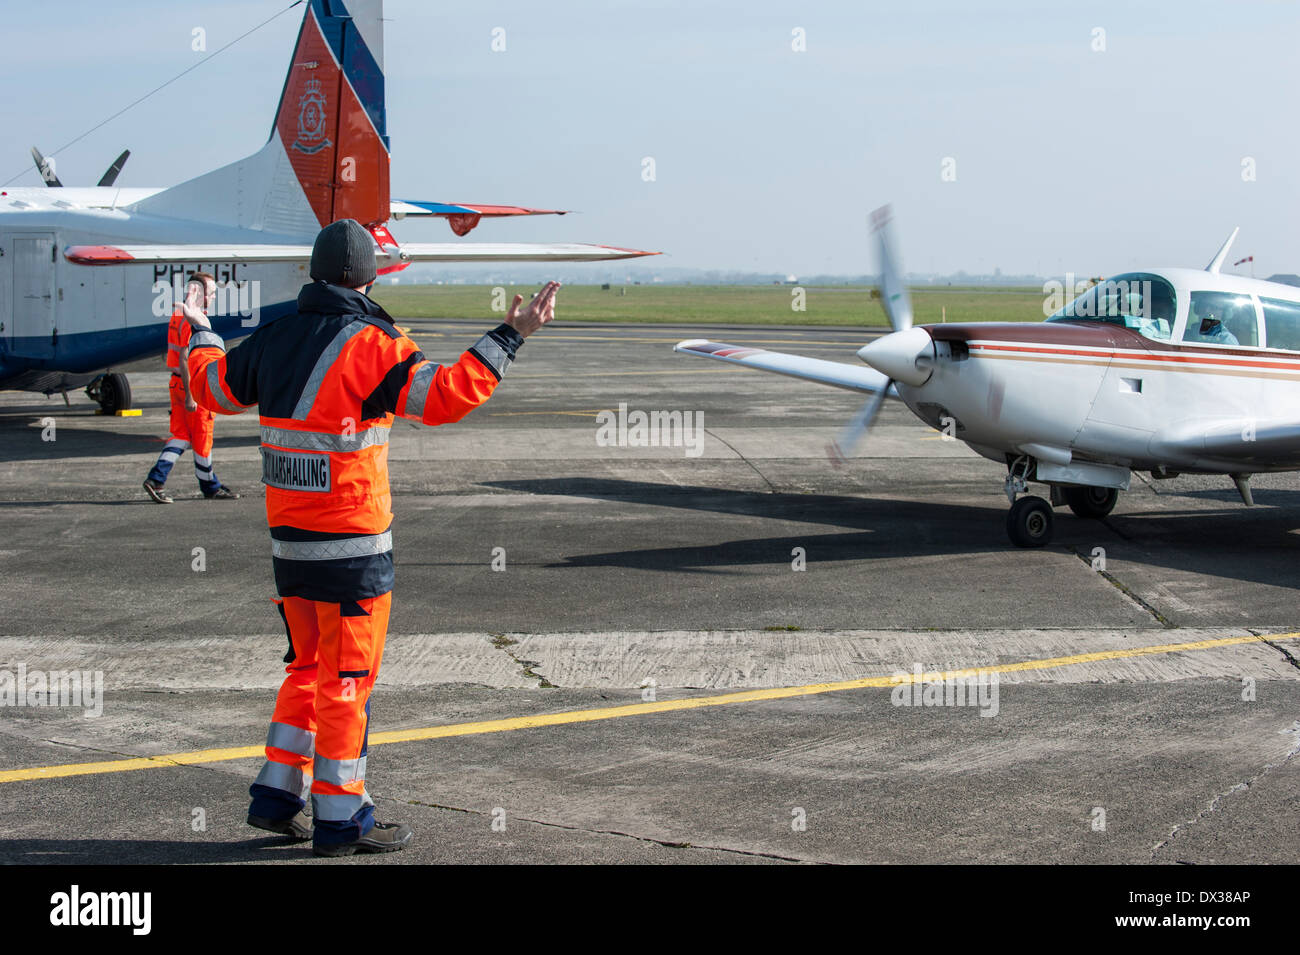 Marshaller giving directions to pilot in aircraft on runway at airport Stock Photo